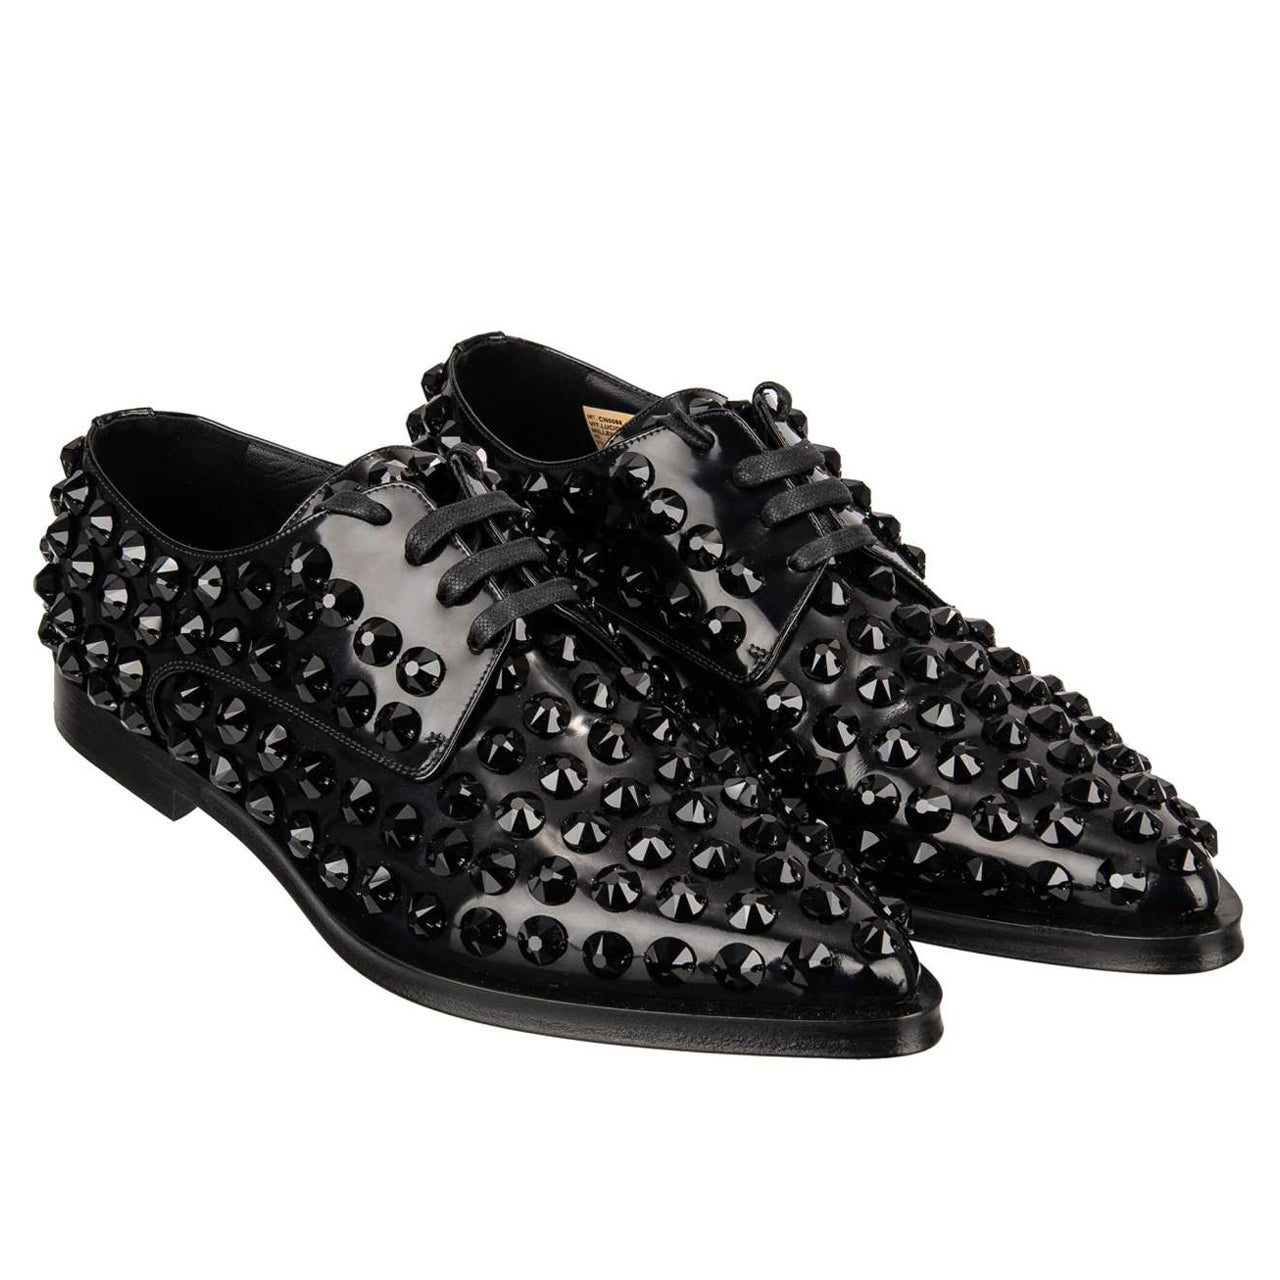 Dolce & Gabbana - Crystal Classic Leather Shoes MILLENIALS Black 40 US 10 For Sale